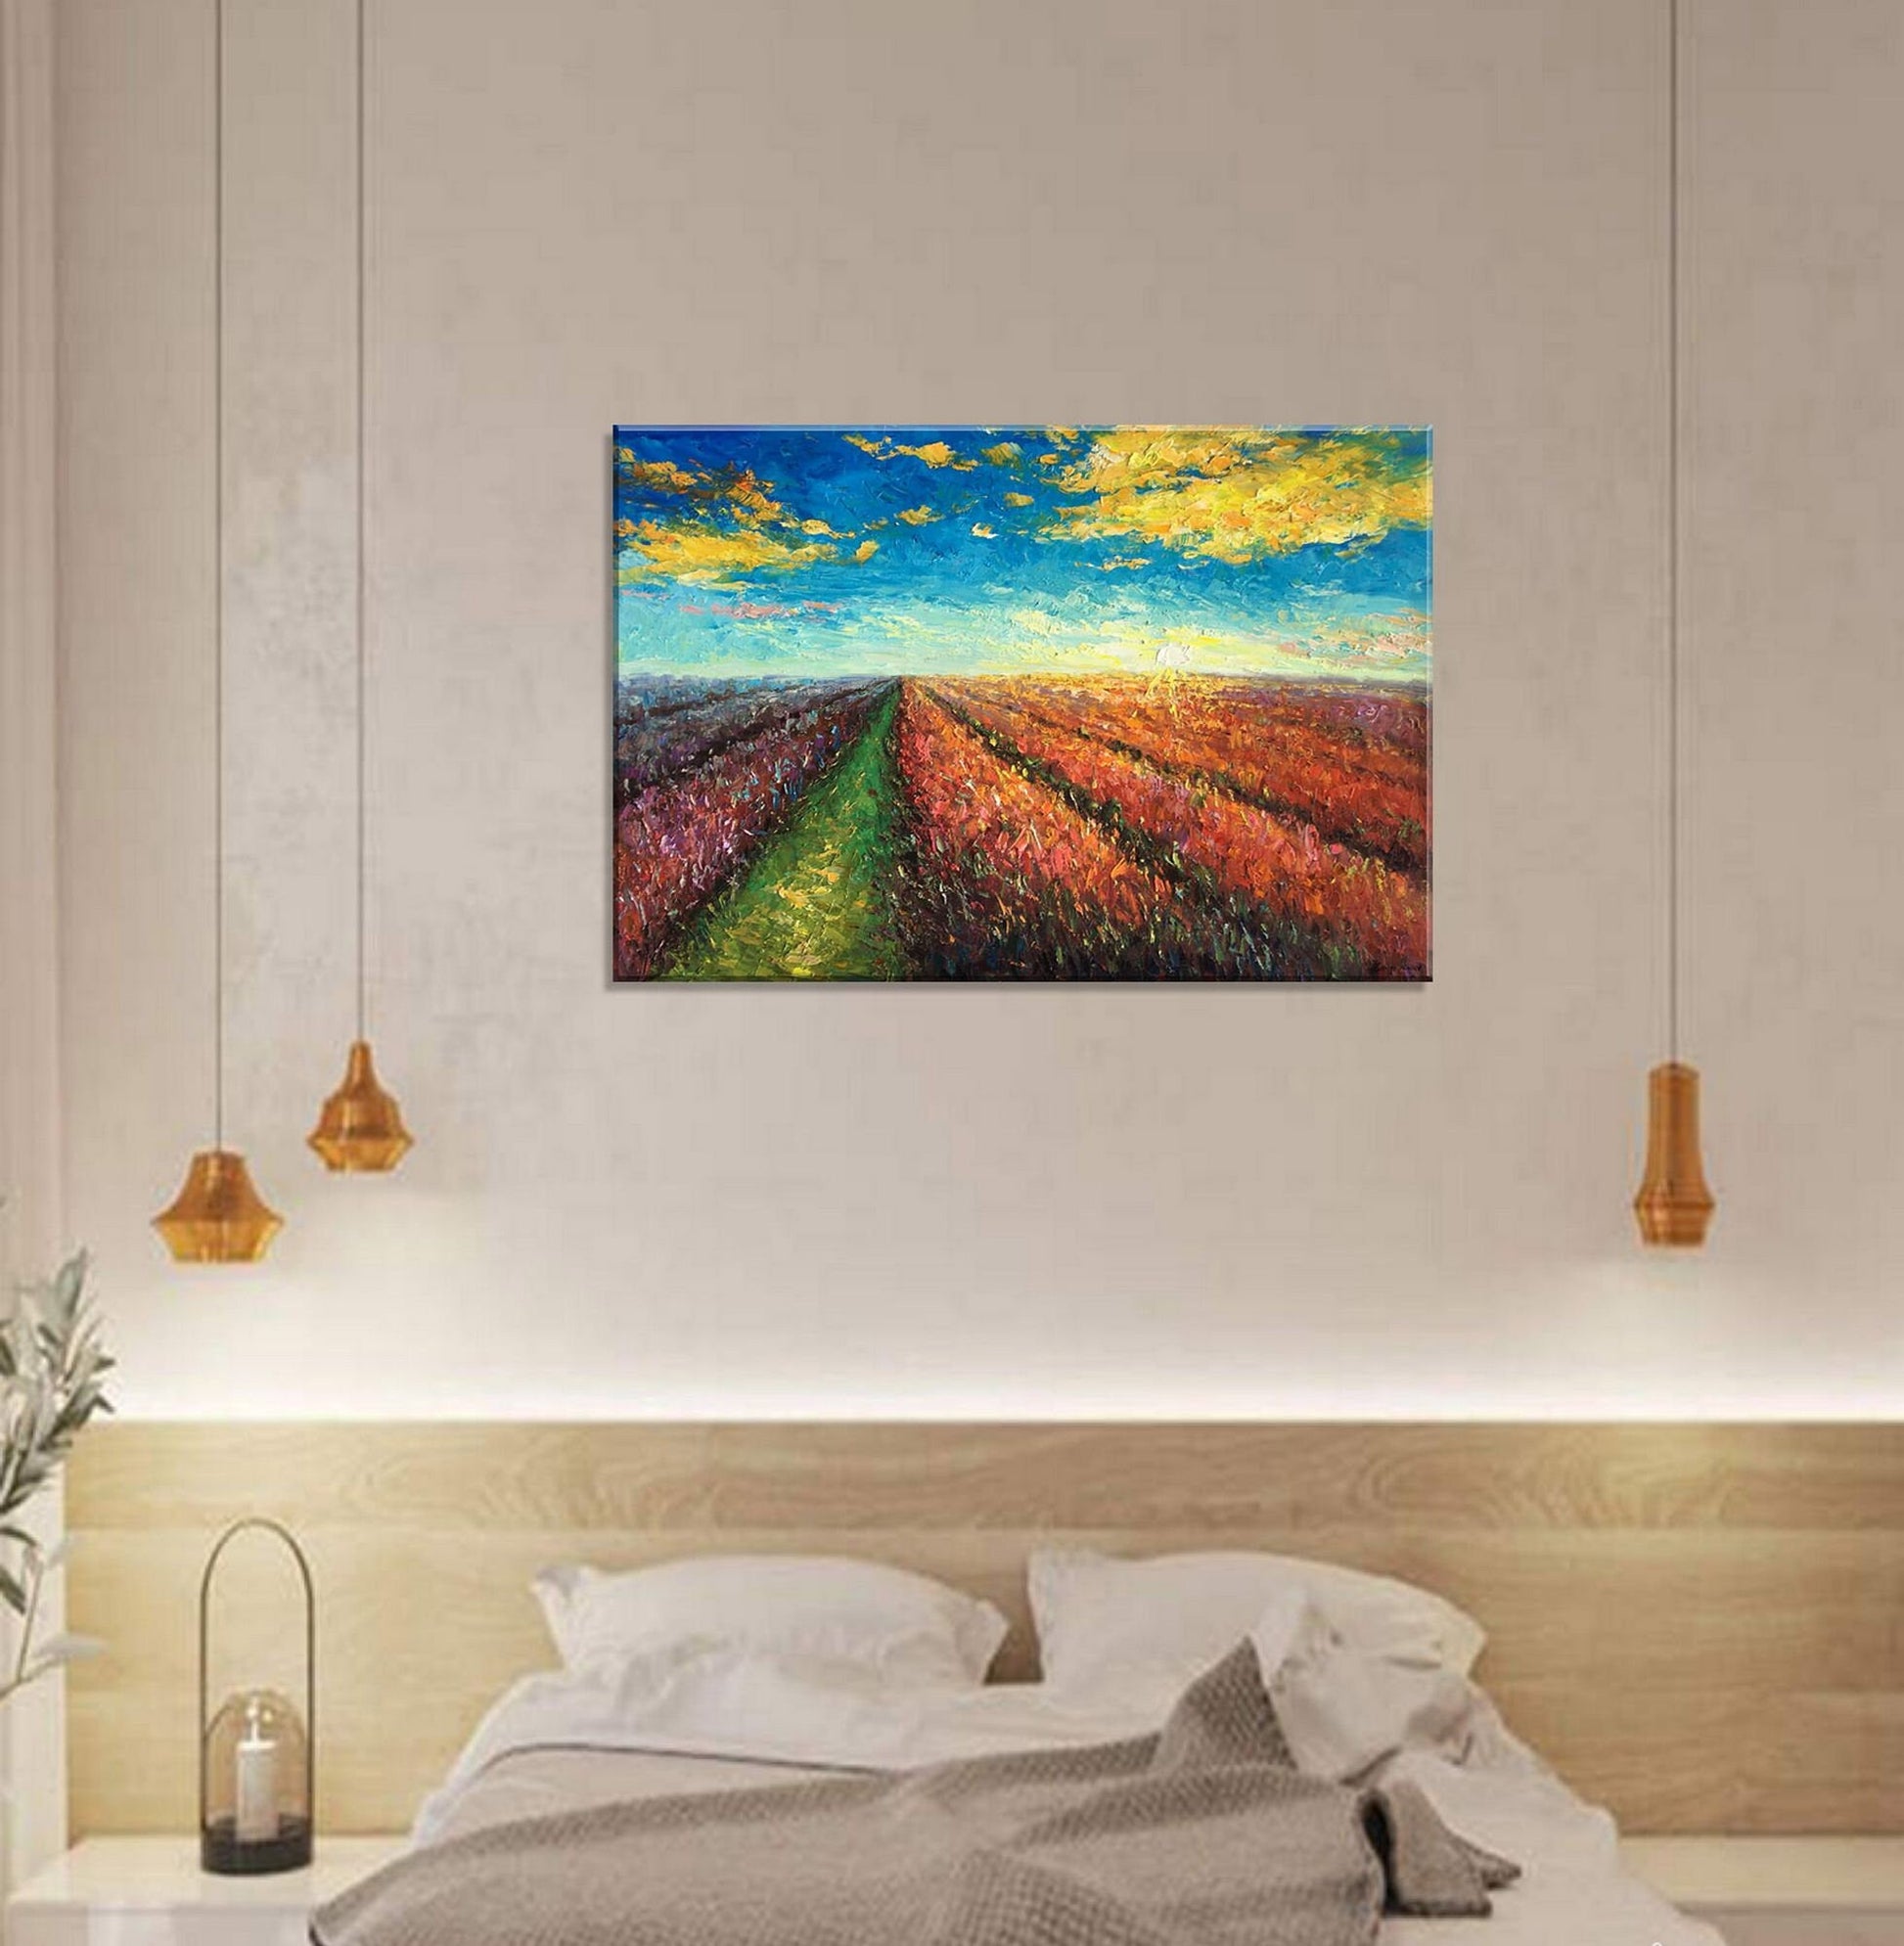 Landscape Painting, Oil Painting, Provence Lavender Fields at Dawn, Canvas Wall Art, Bedroom Decor, Large Art, Painting Abstract